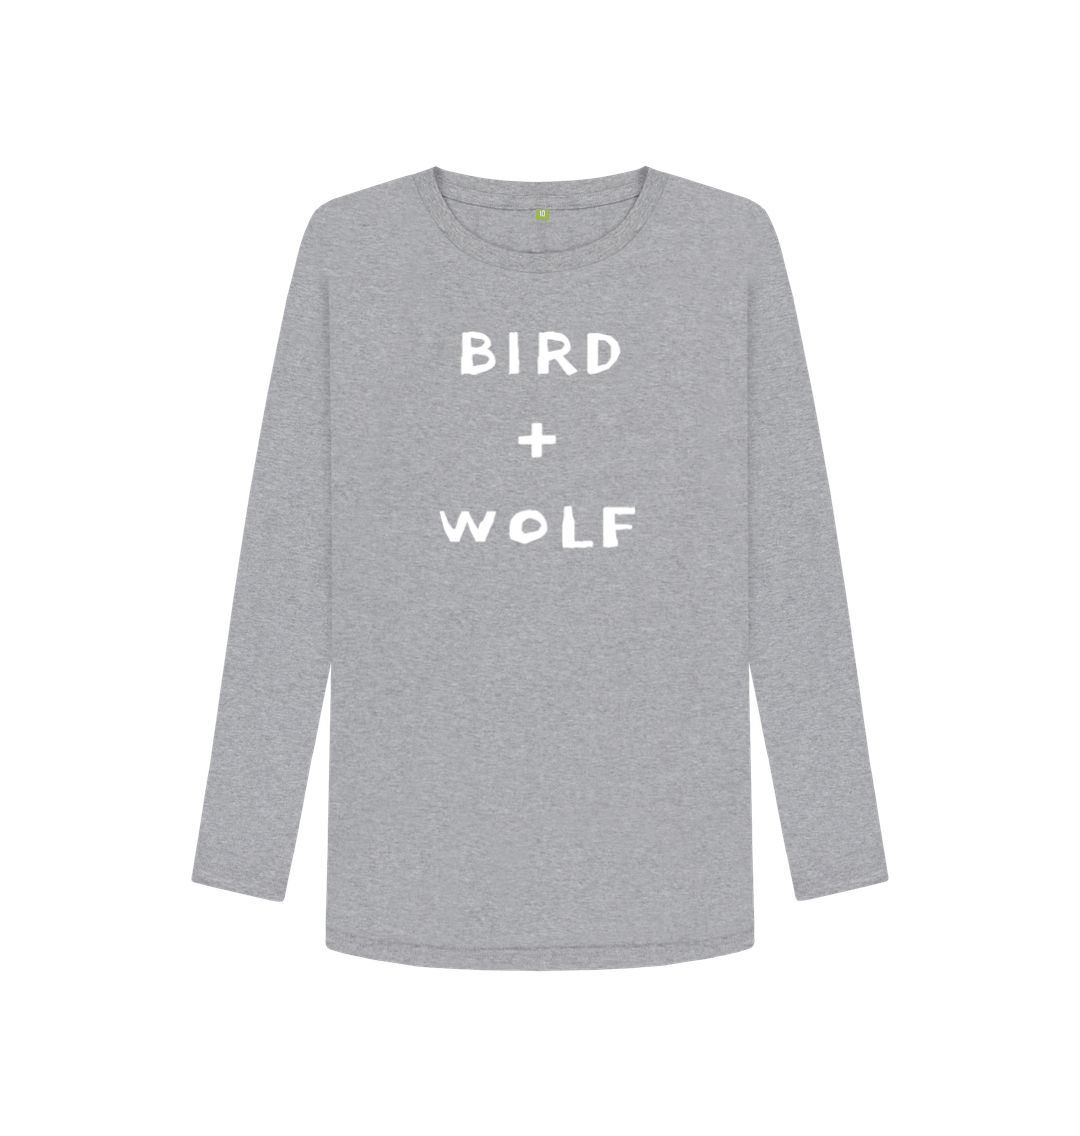 Athletic Grey Bird + Wolf Long Sleeve Tee (White lettering)